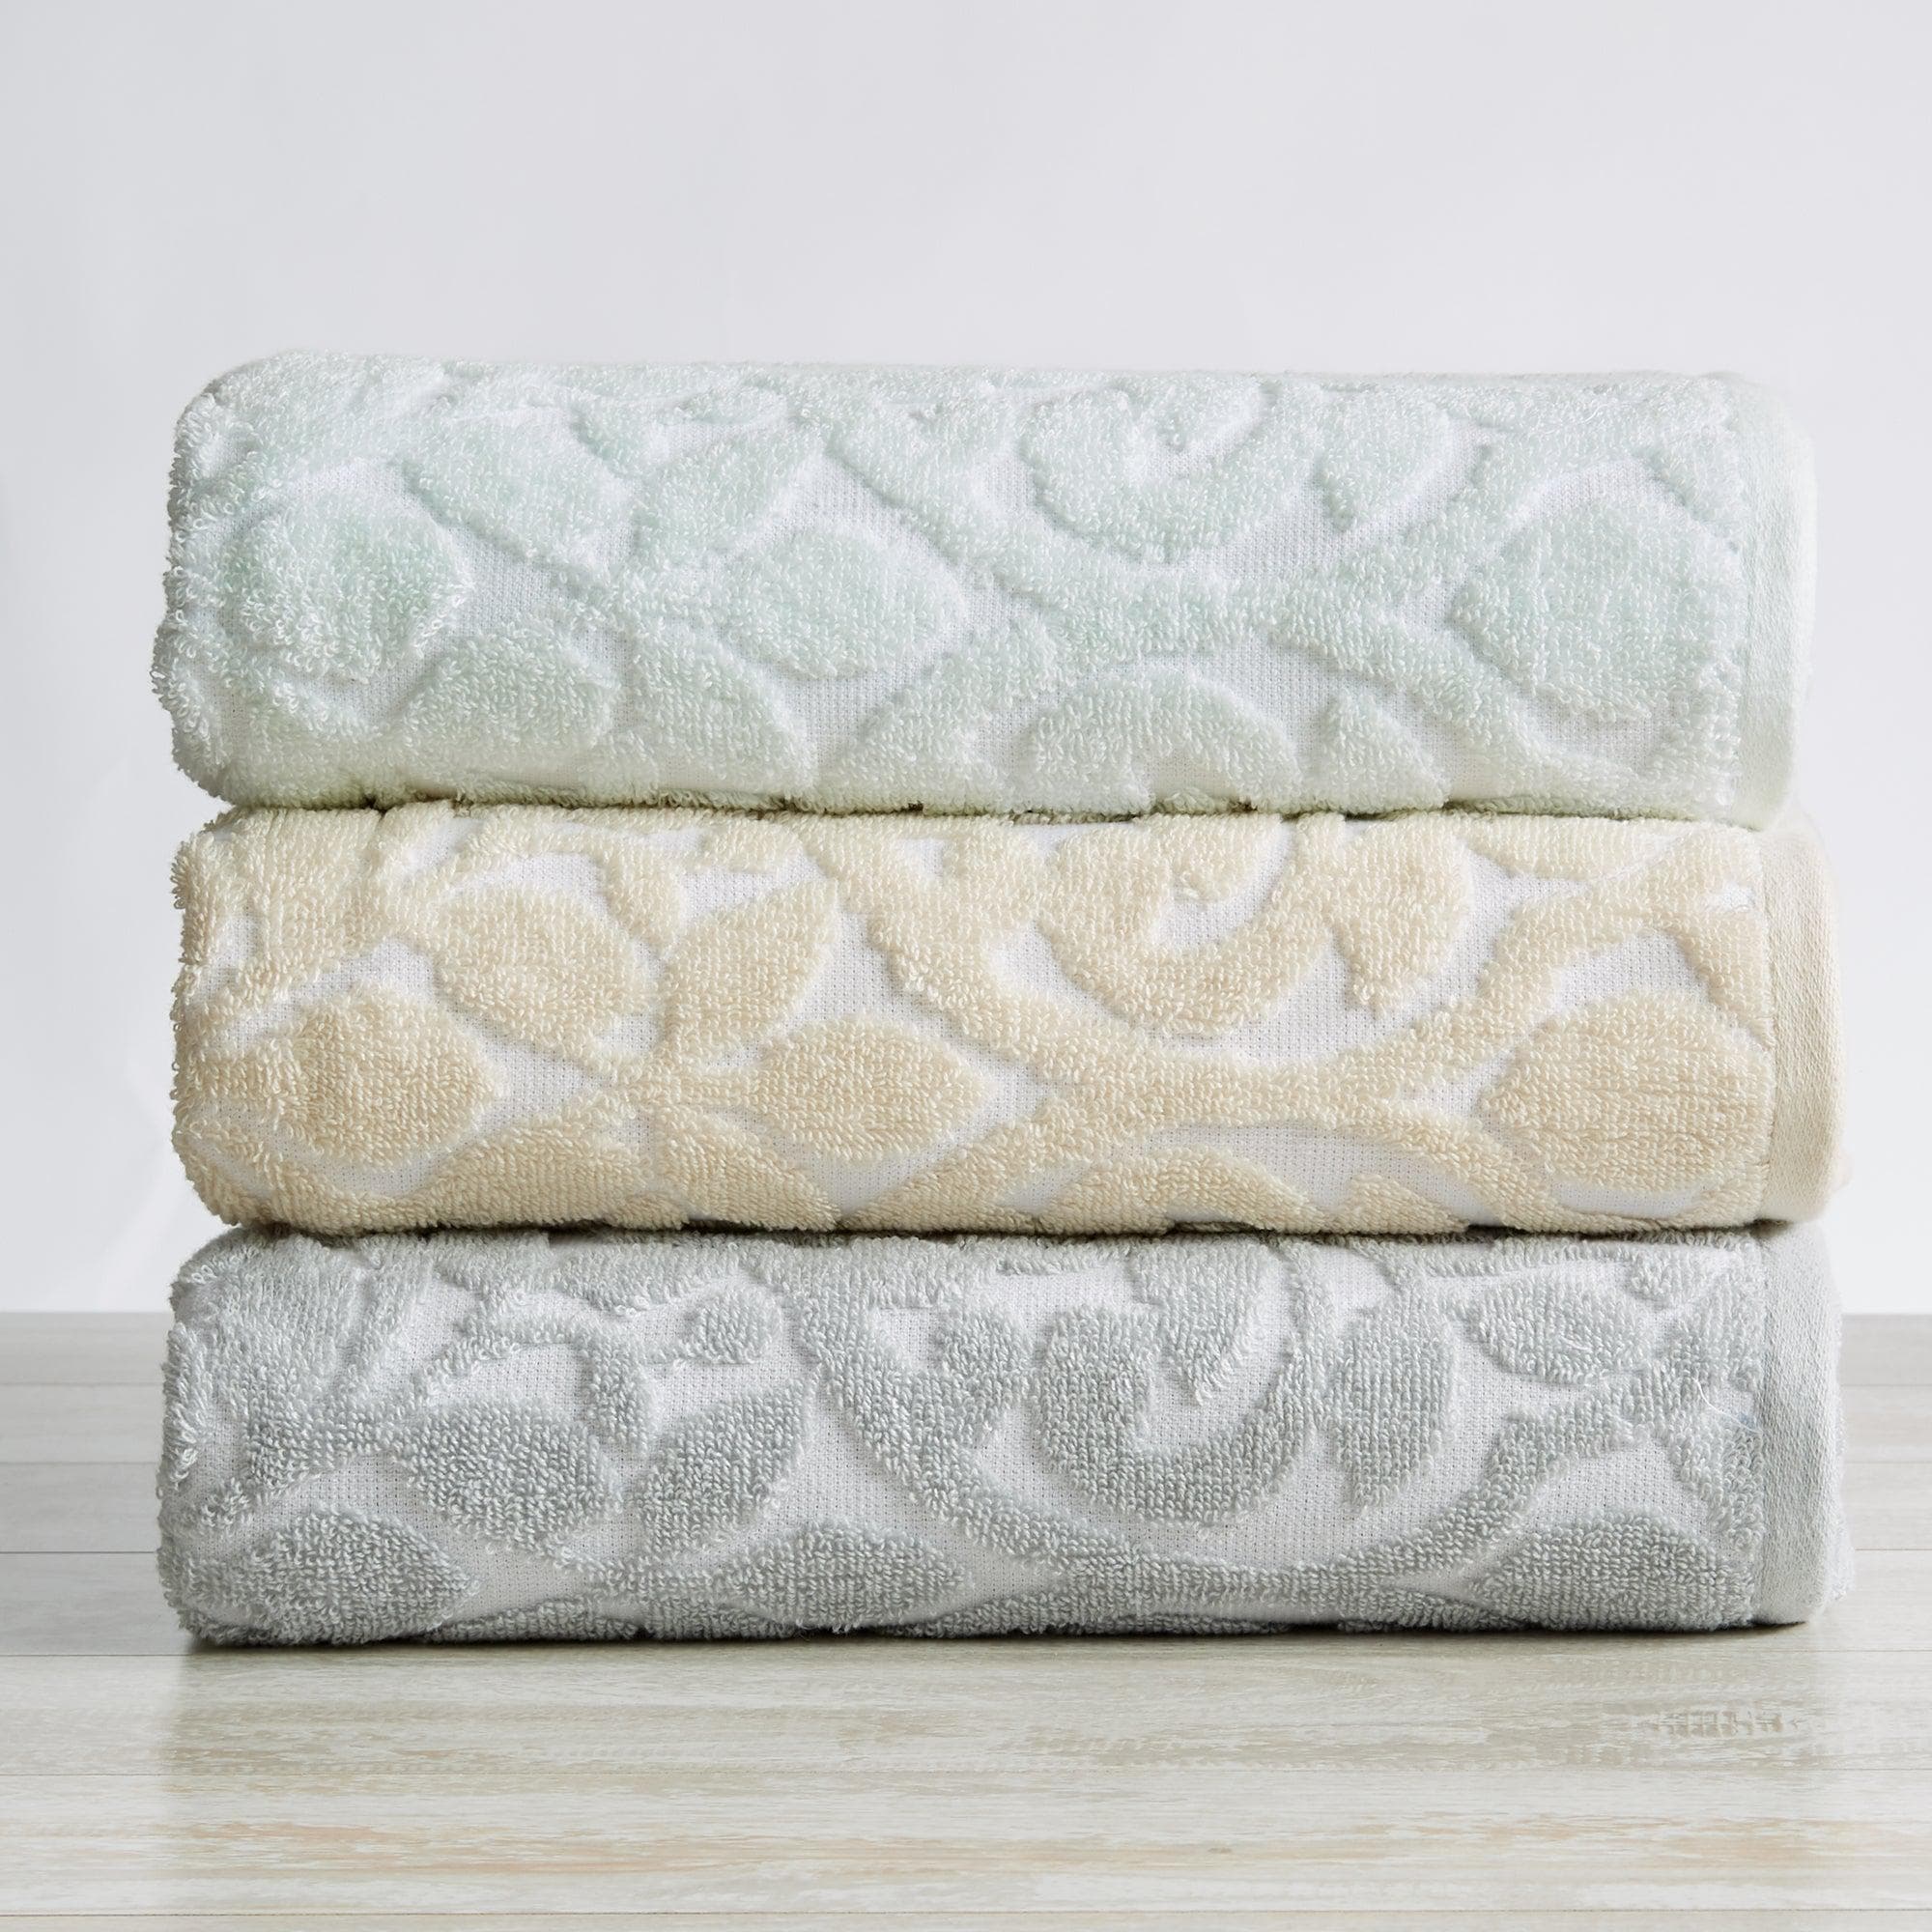 Great Bay Home 100% Cotton Jacquard Bathroom Towels. Absorbent